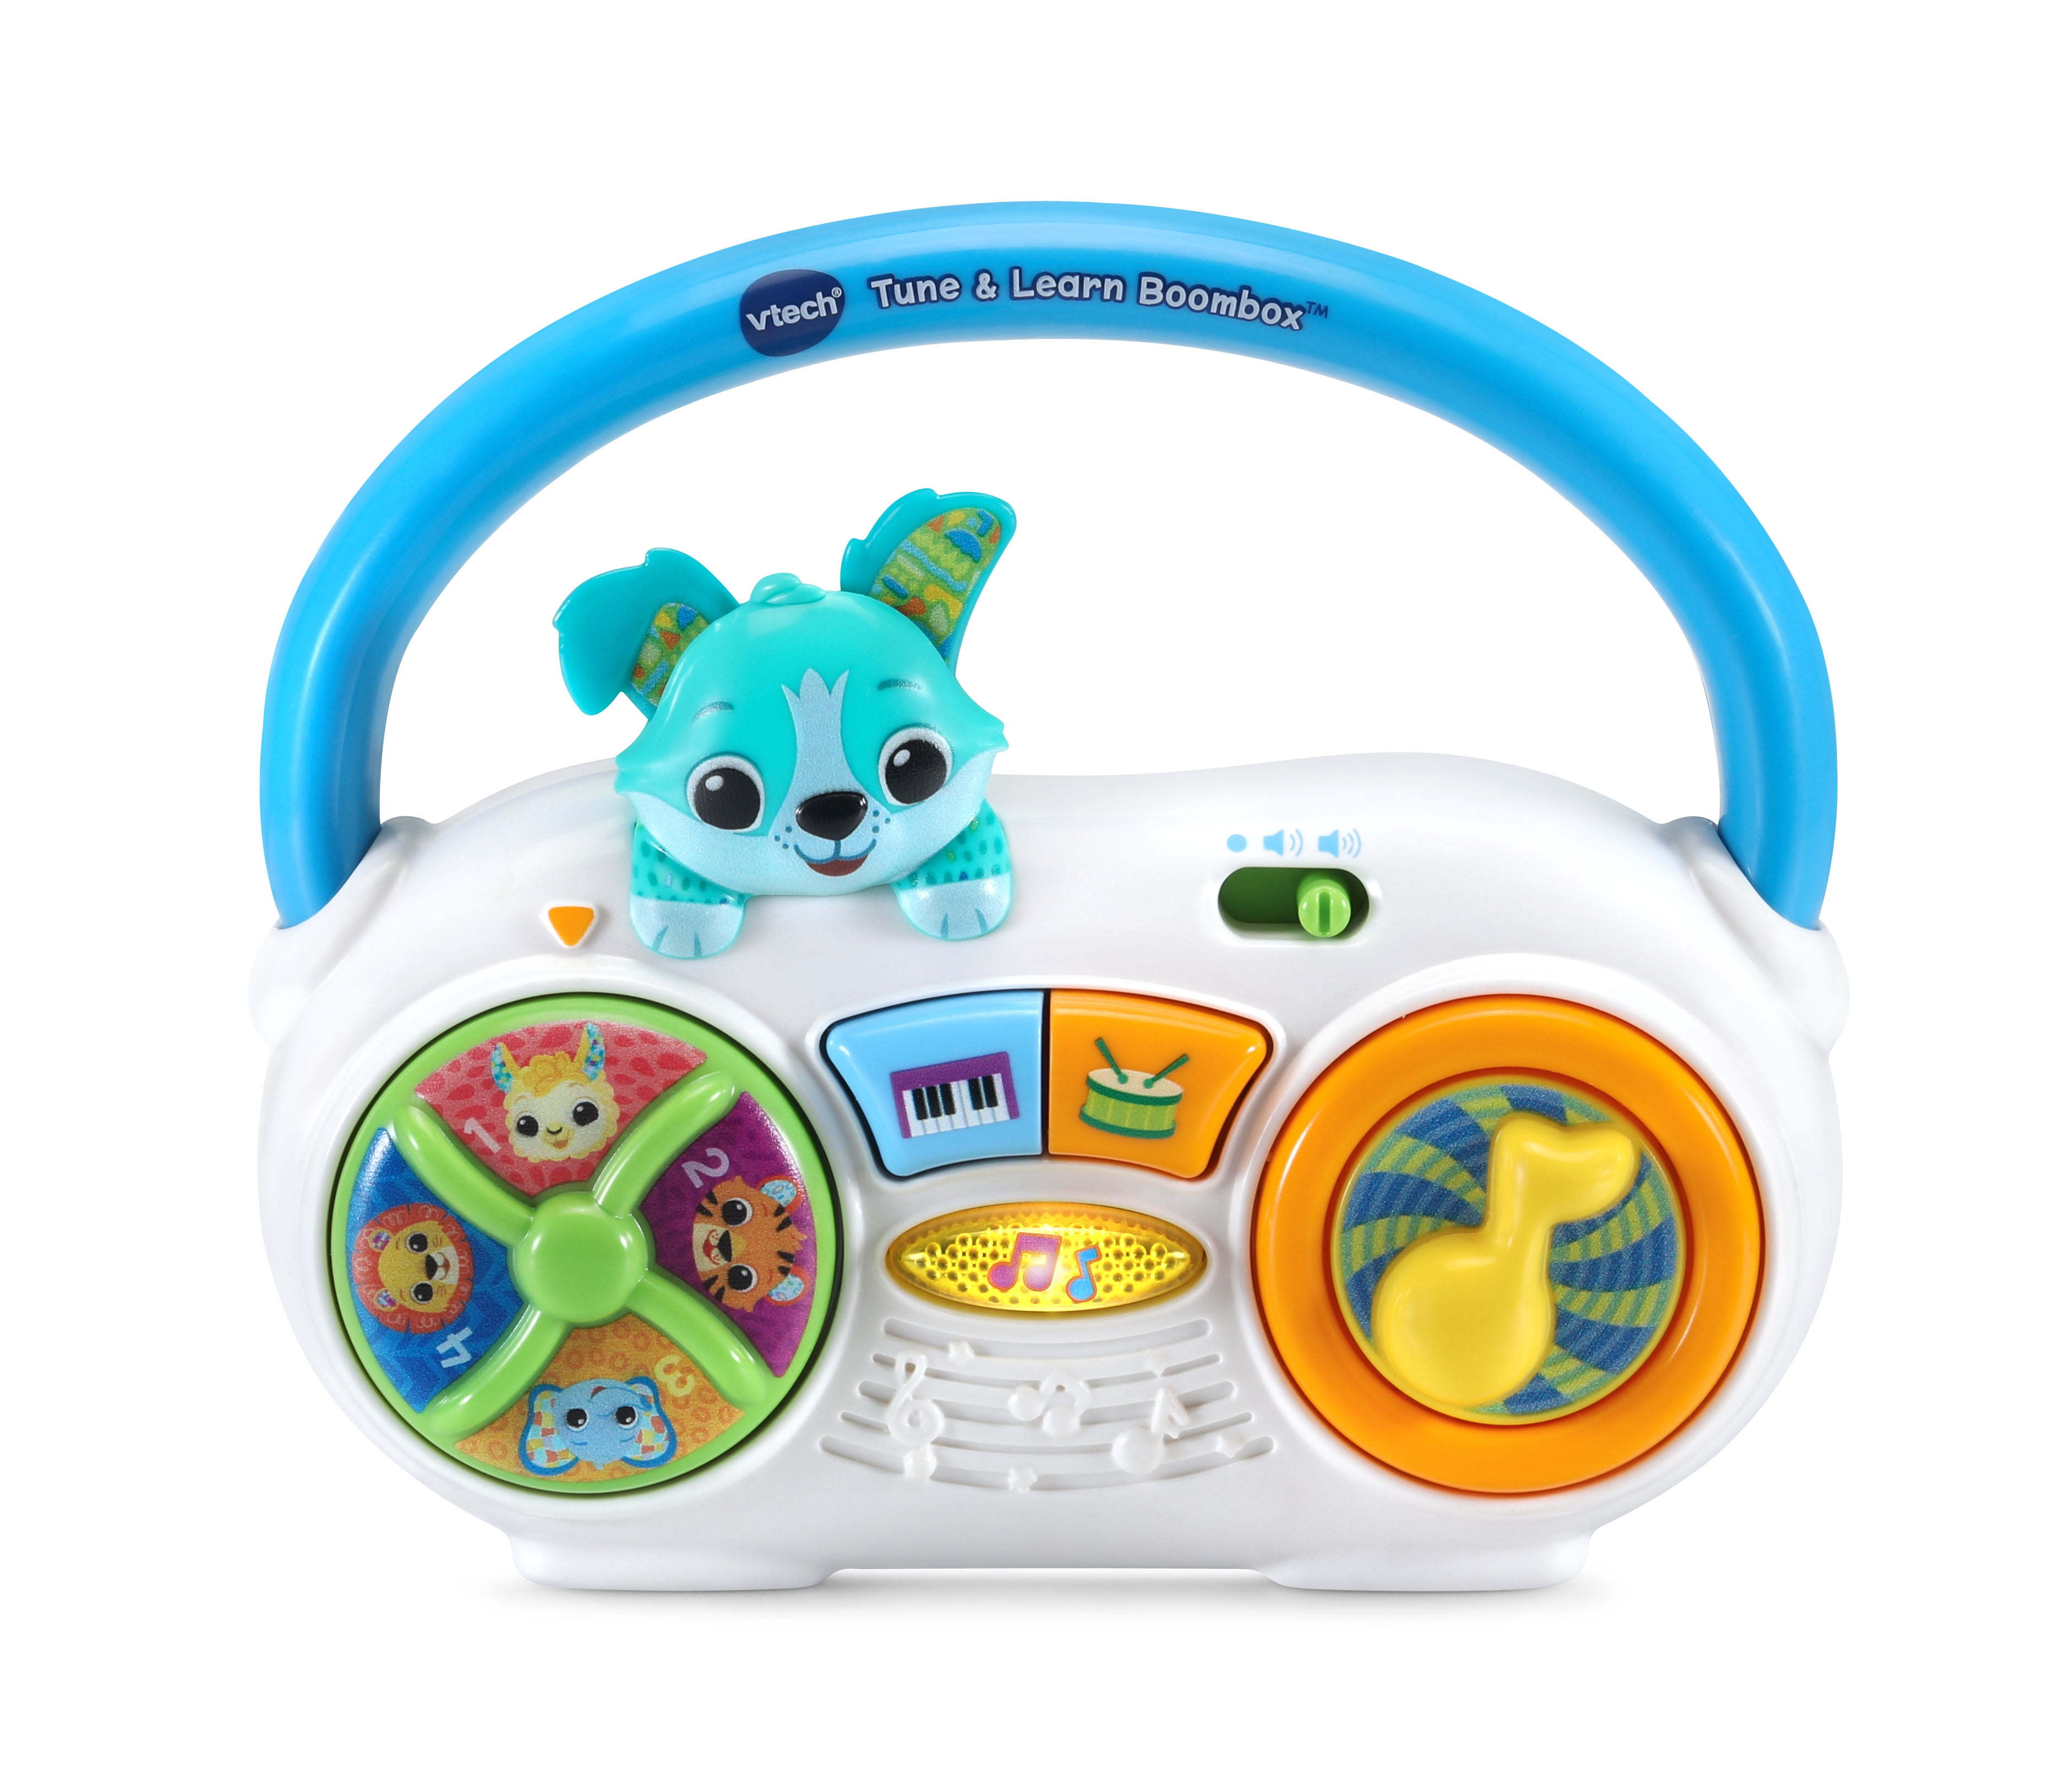 CHILDREN'S MUSICAL BOOM BOX PLAYER,W/ LIGHTS,SOUNDS,TUNES,Blue & YELLOW,18m+NEW 